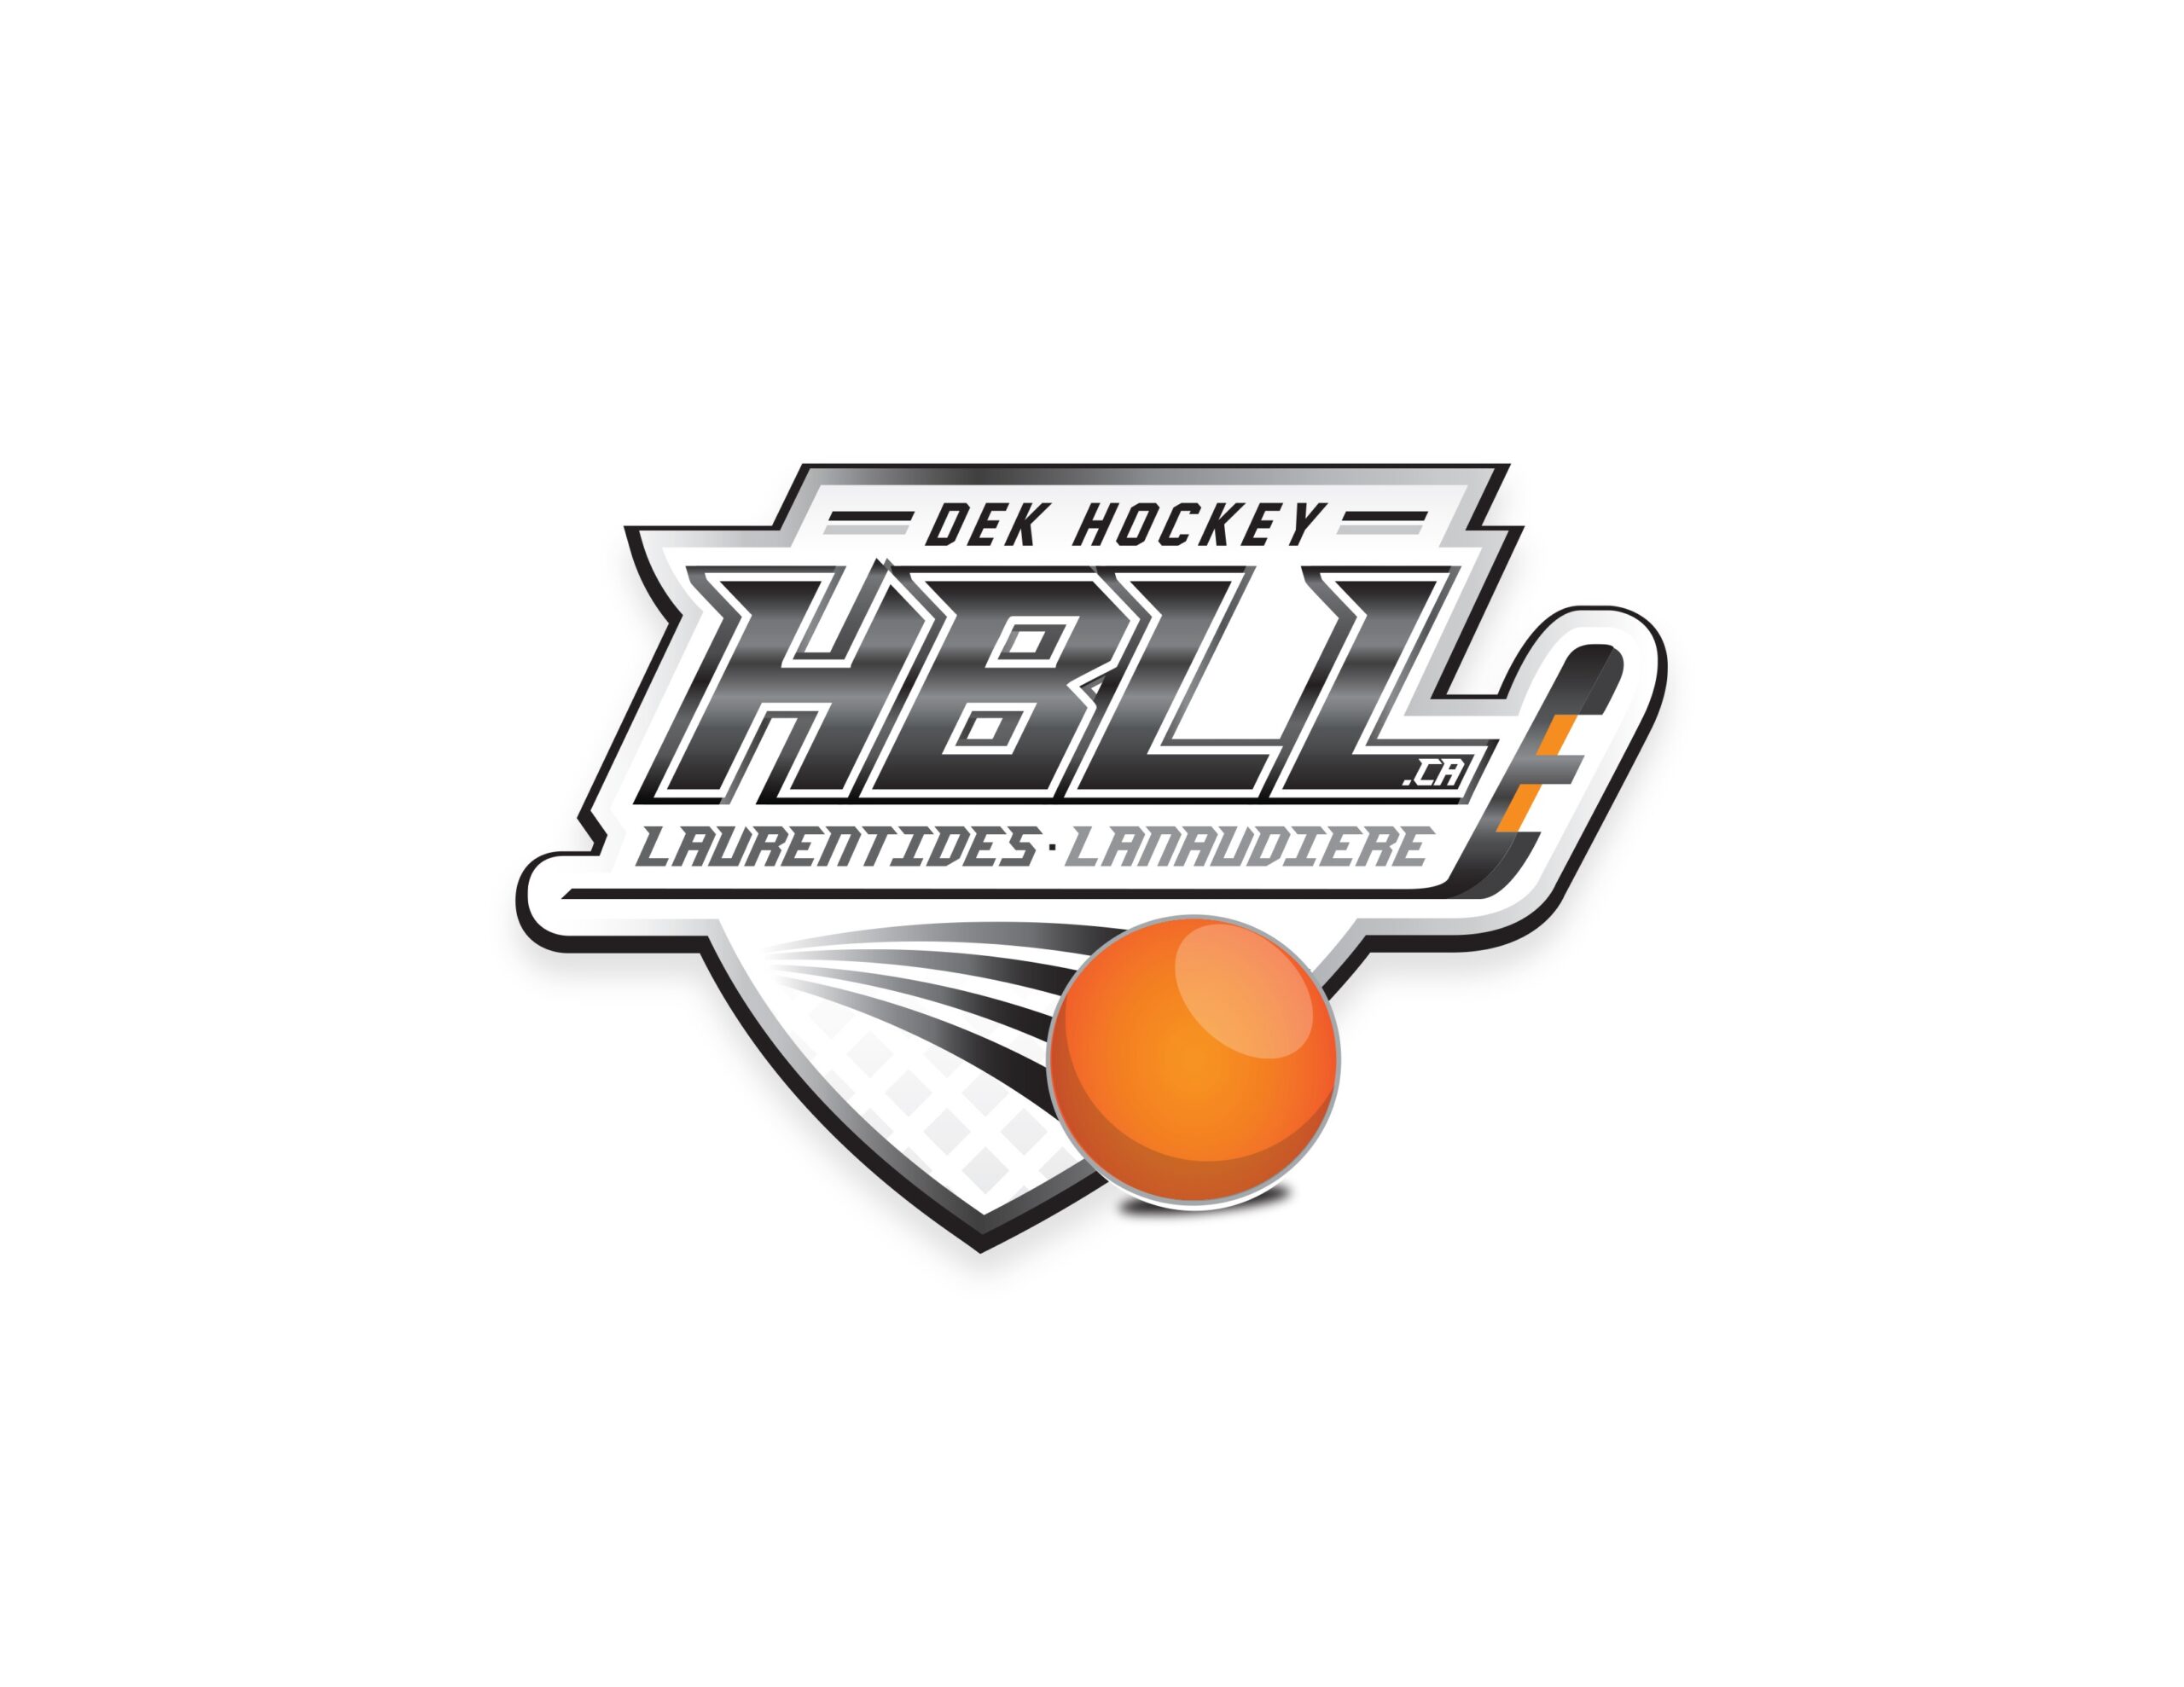 HBLL_logo_redesigned_official